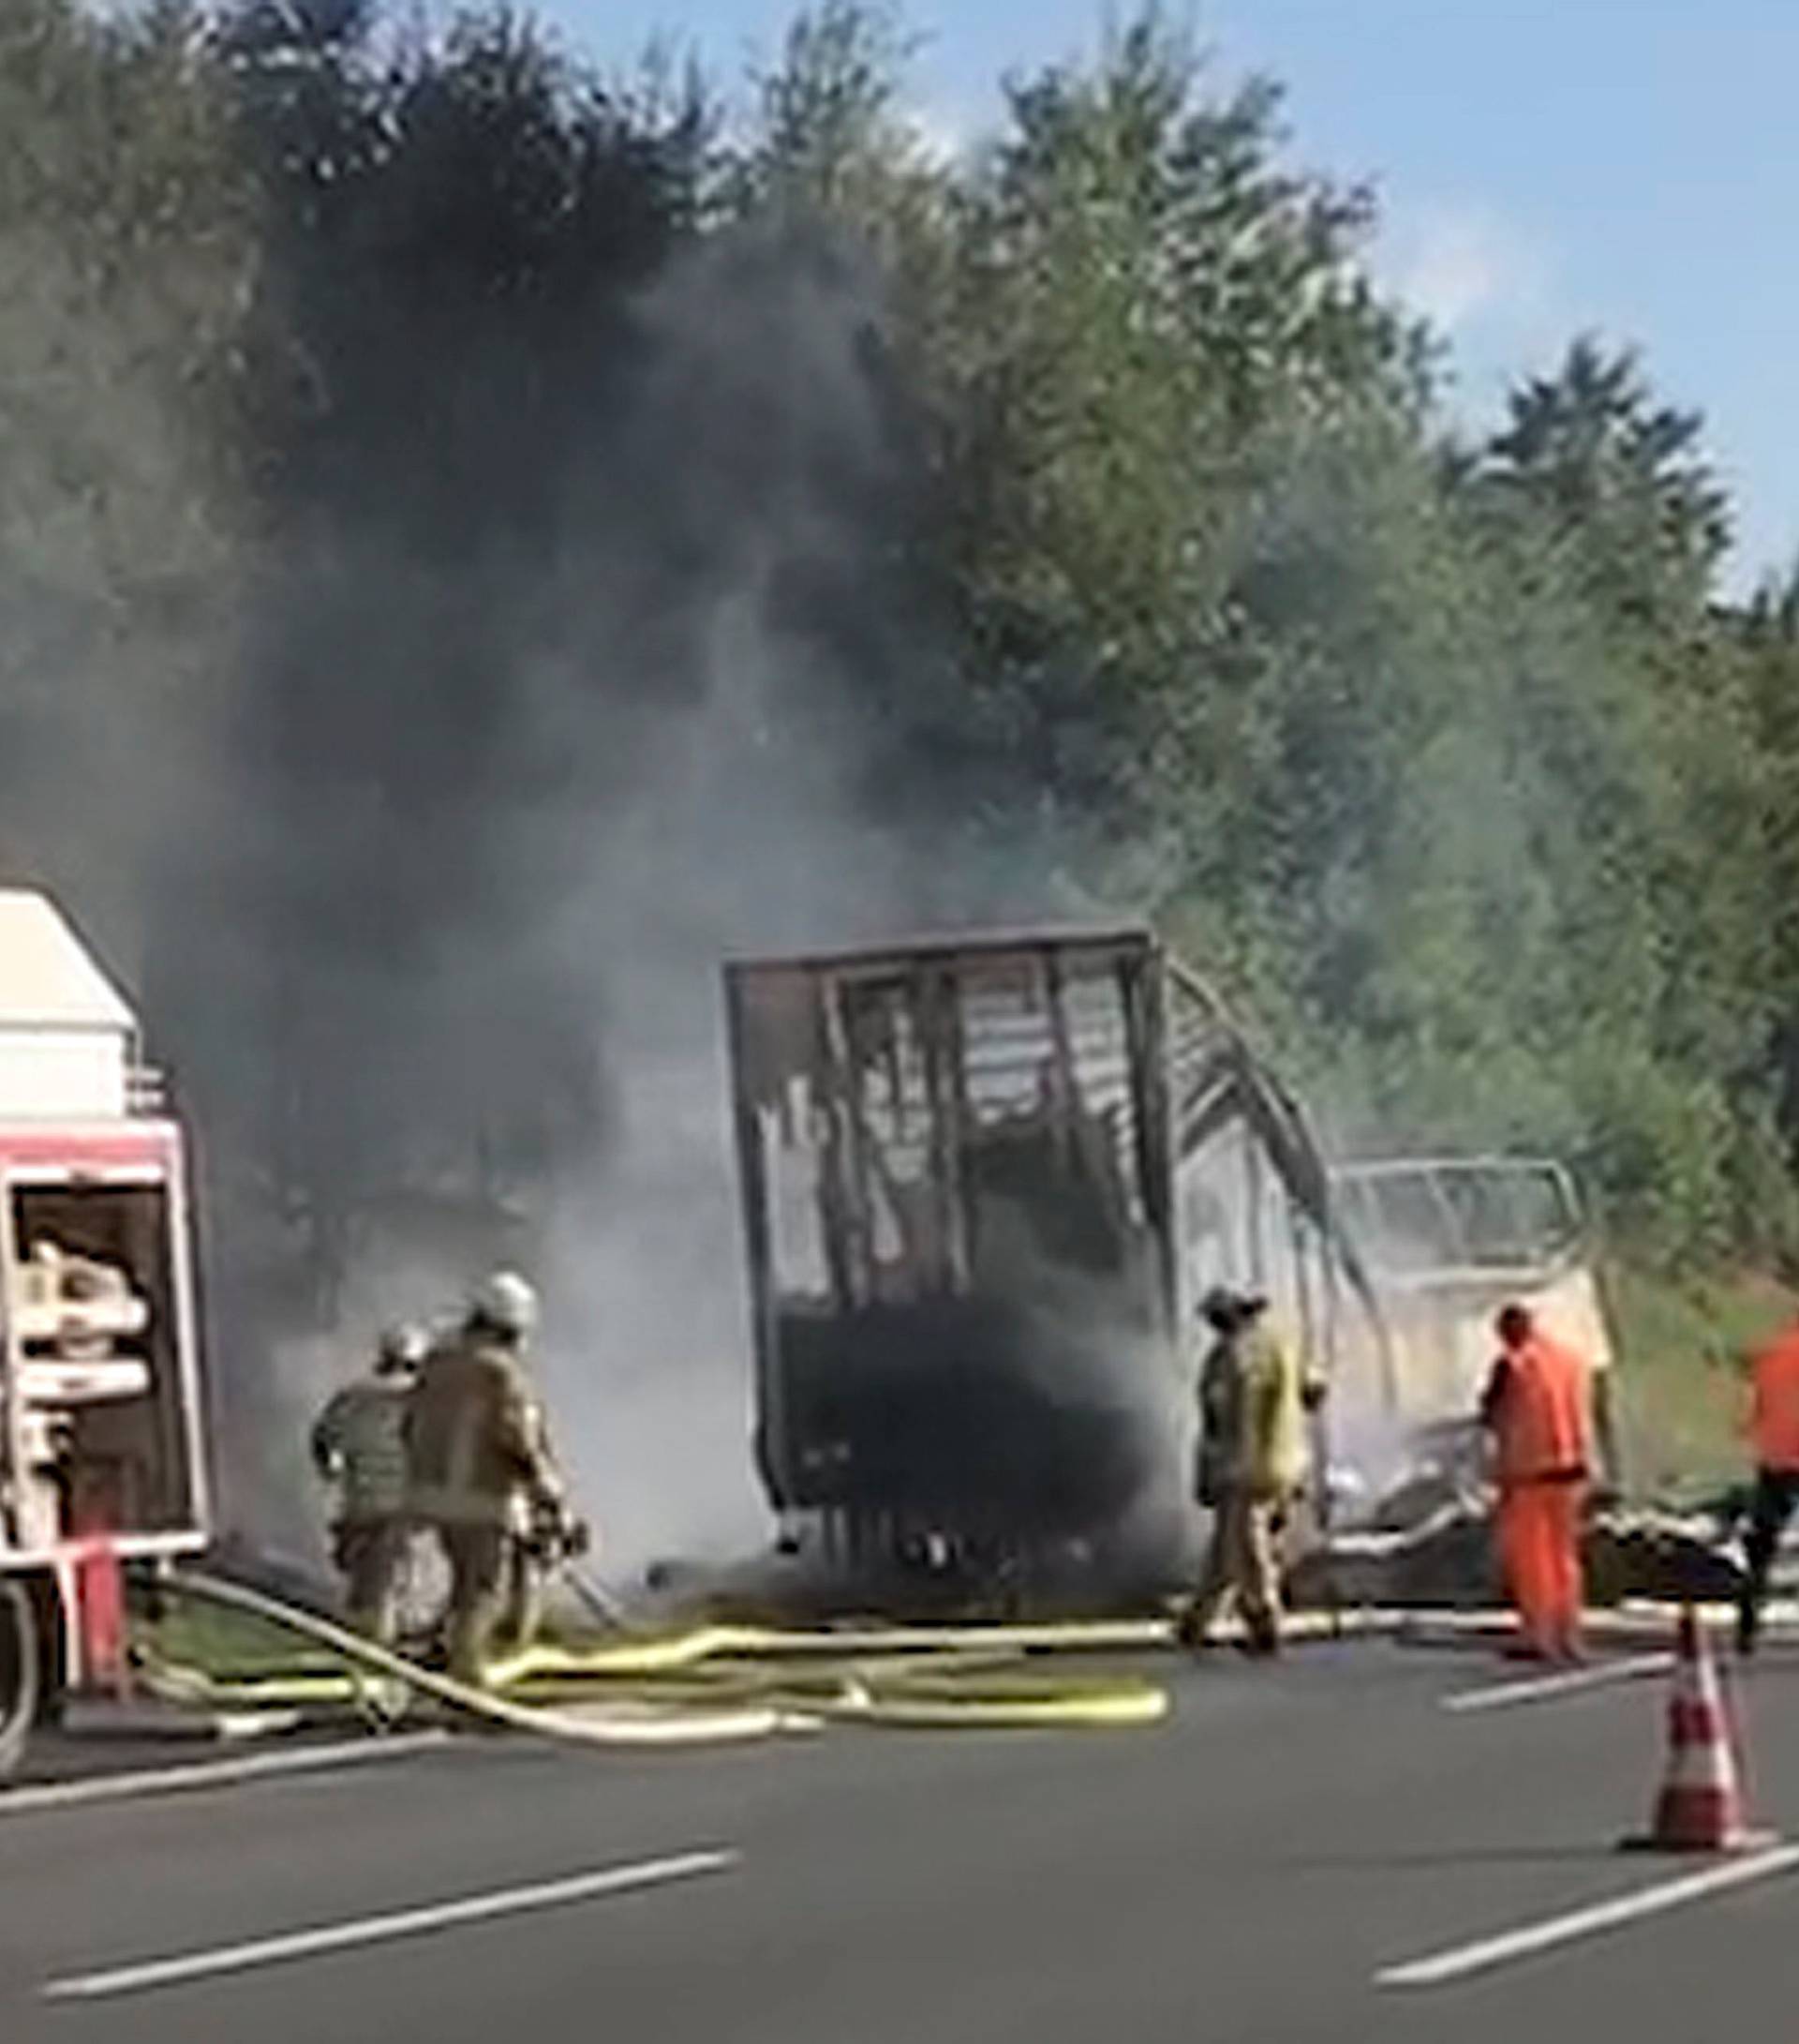 Firefighters walk at the site where a coach burst into flames after colliding with a lorry on a motorway near Muenchberg